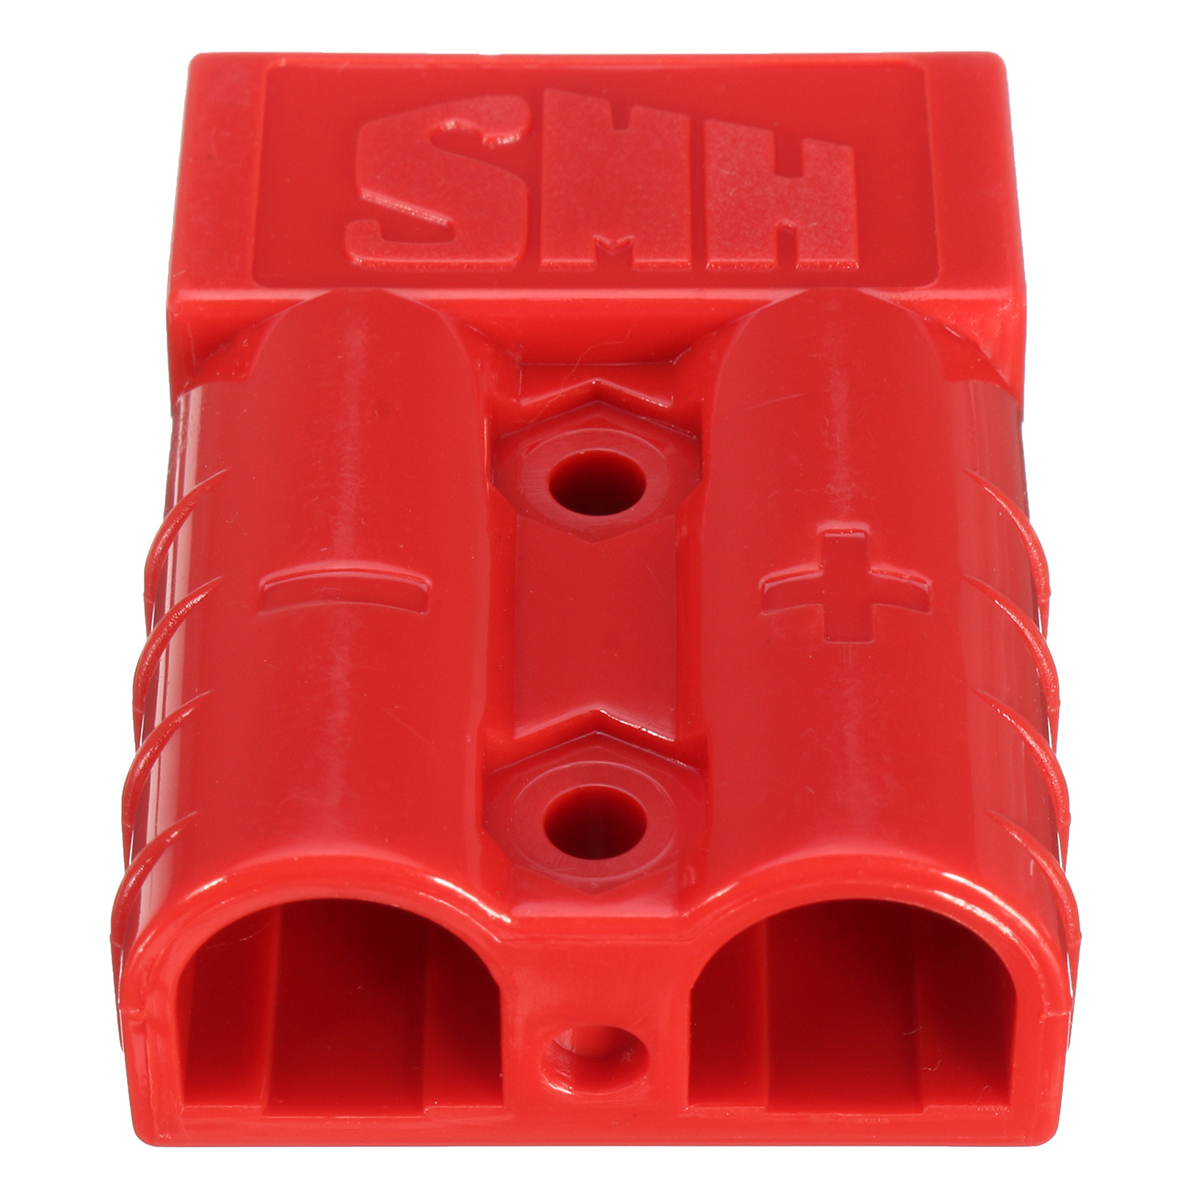 Excellway-50A-8AWG-Battery-Quick-Connector-Plug-Connect-Terminal-Disconnect-Winch-Trailer-Red-1170740-5